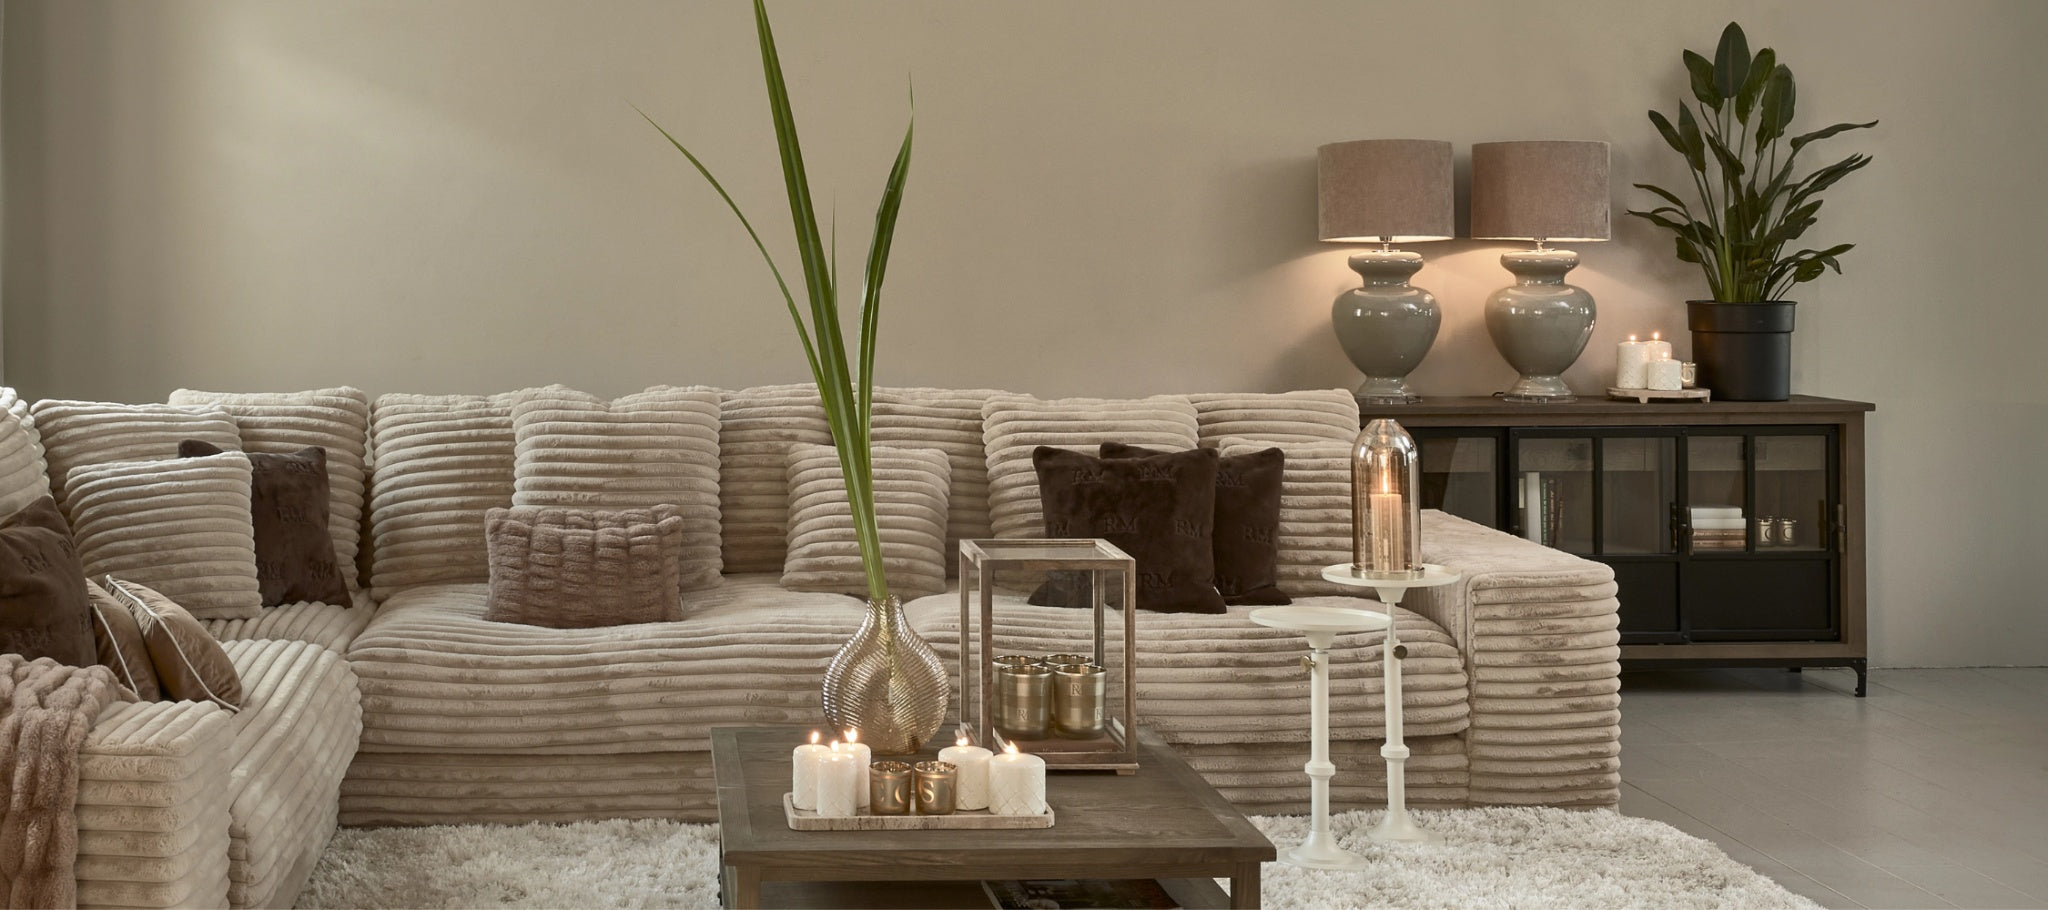 Riviera Maison Living room with sofa in color beige, table candle and decoration